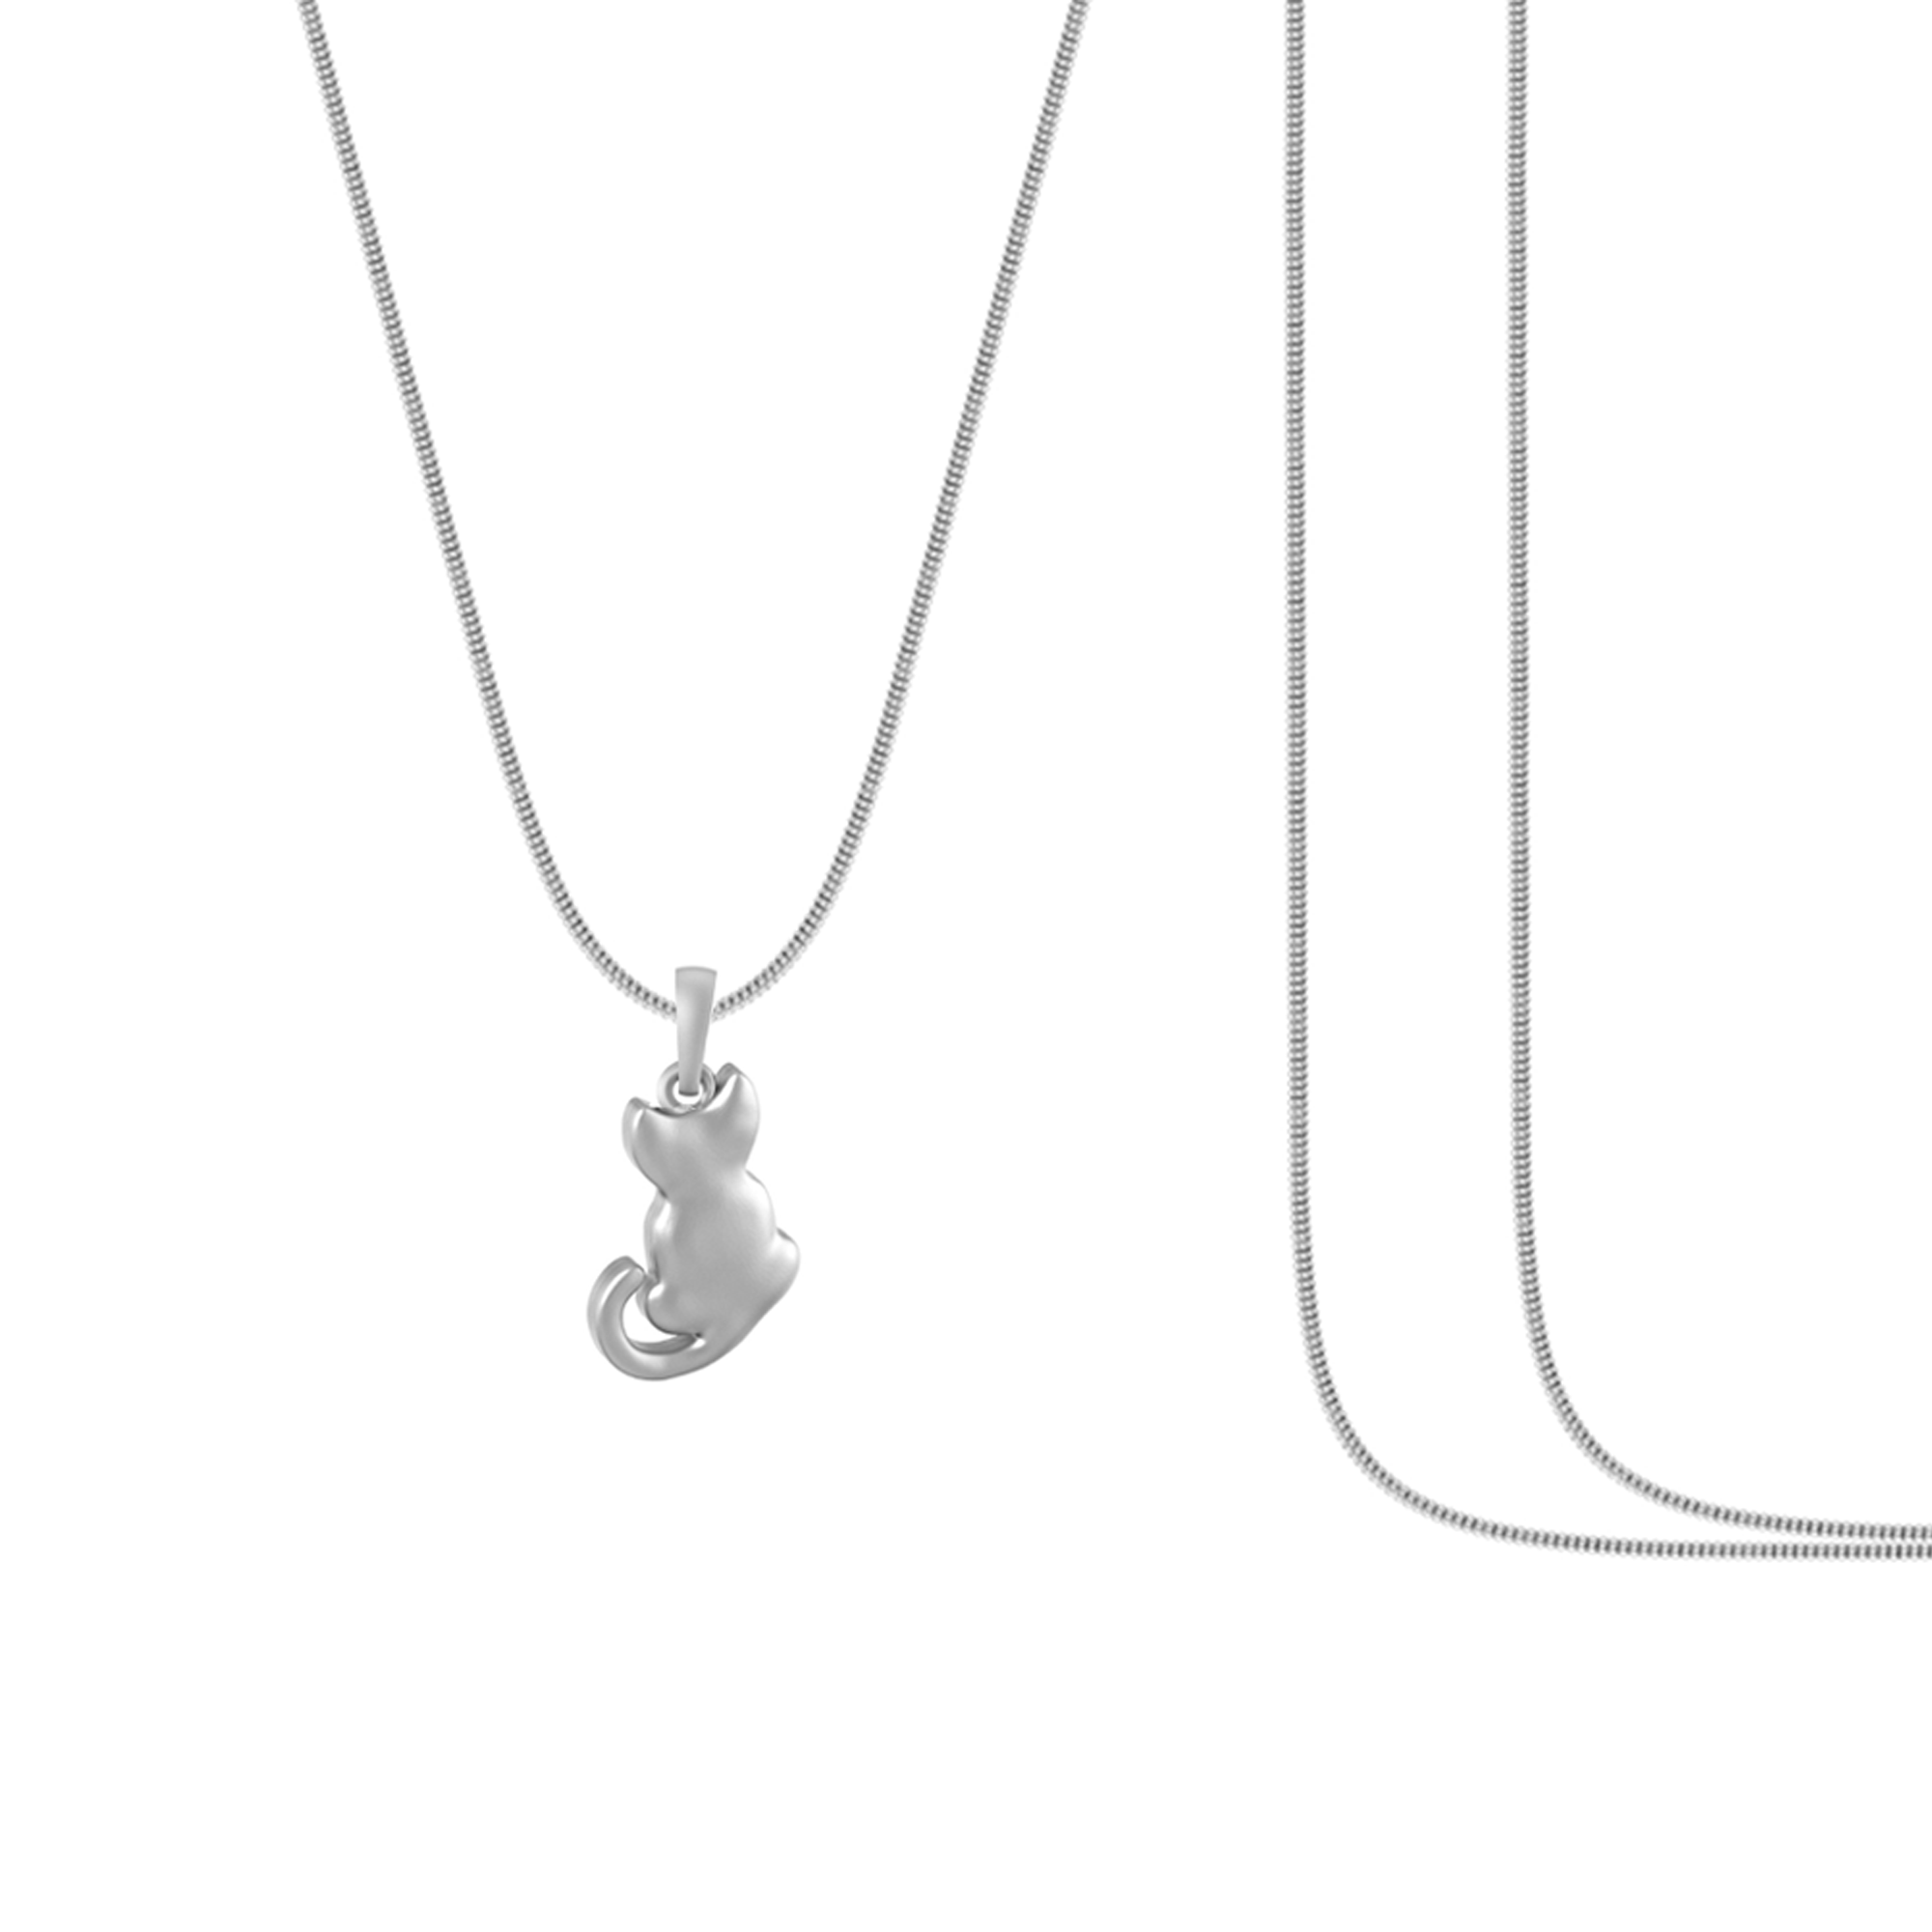 Silver Stylish and Fashionable Cute Cat Chain Pendan (92.5% purity) by Akshat Sapphire Cute Cat Chain Pendan  for Kids (Snake Chain: 15 Inches)